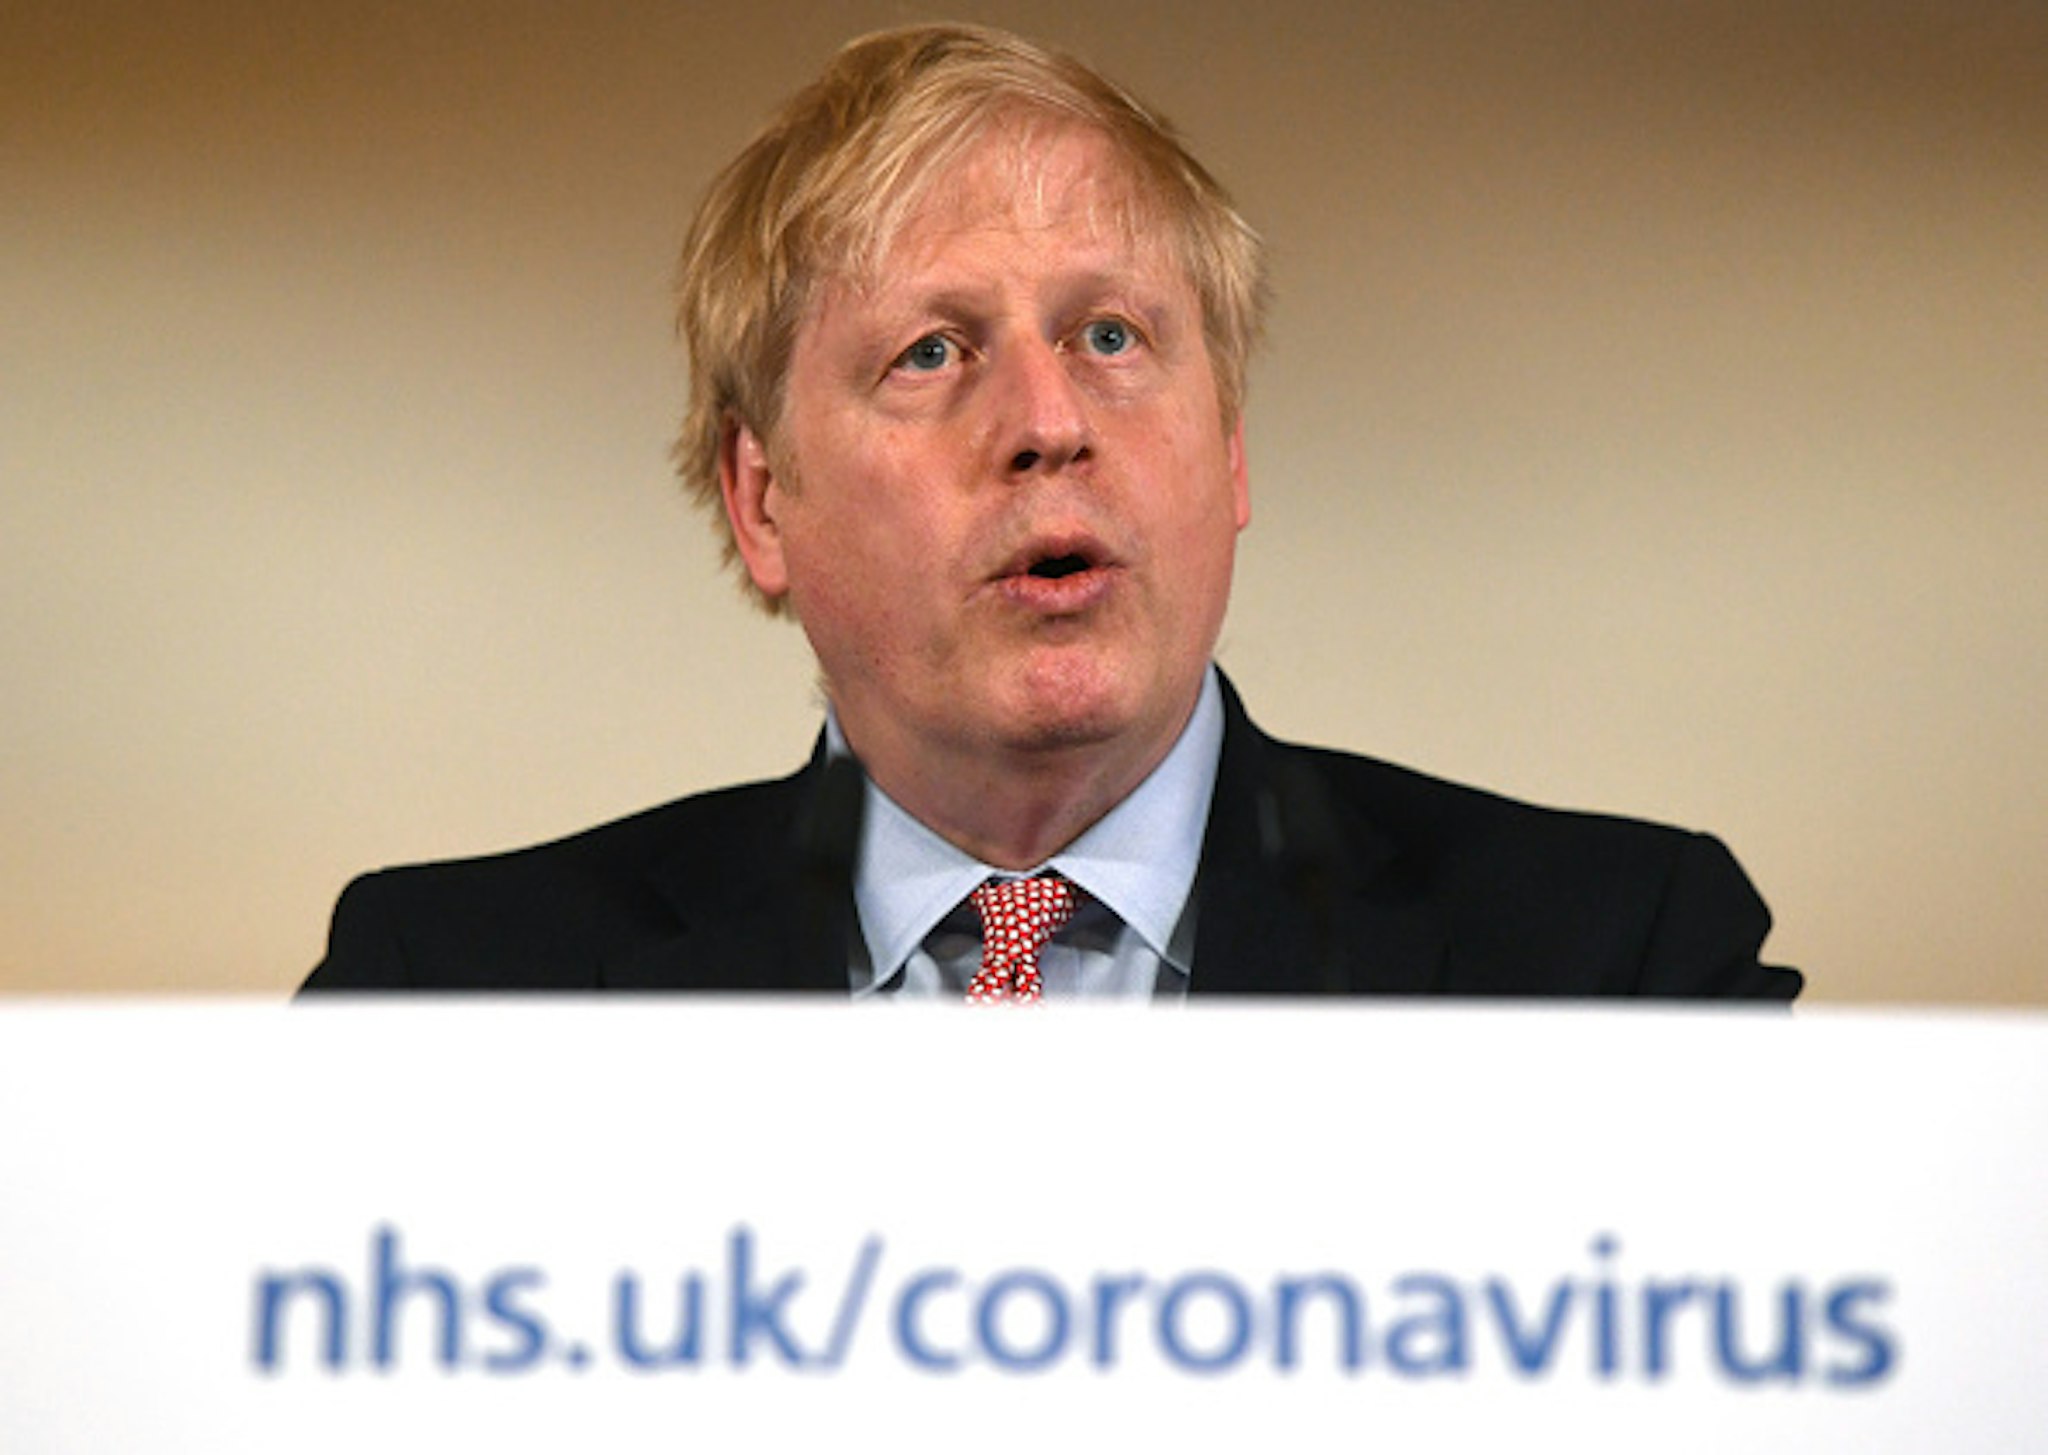 Boris Johnson, U.K. prime minister, speaks during a coronavirus news conference inside number 10 Downing Street in London, U.K., on Thursday, March 12, 2020. Johnson said the true scale of the outbreak may be "much higher" than the 590 patients who have tested positive for the virus in the U.K. so far.